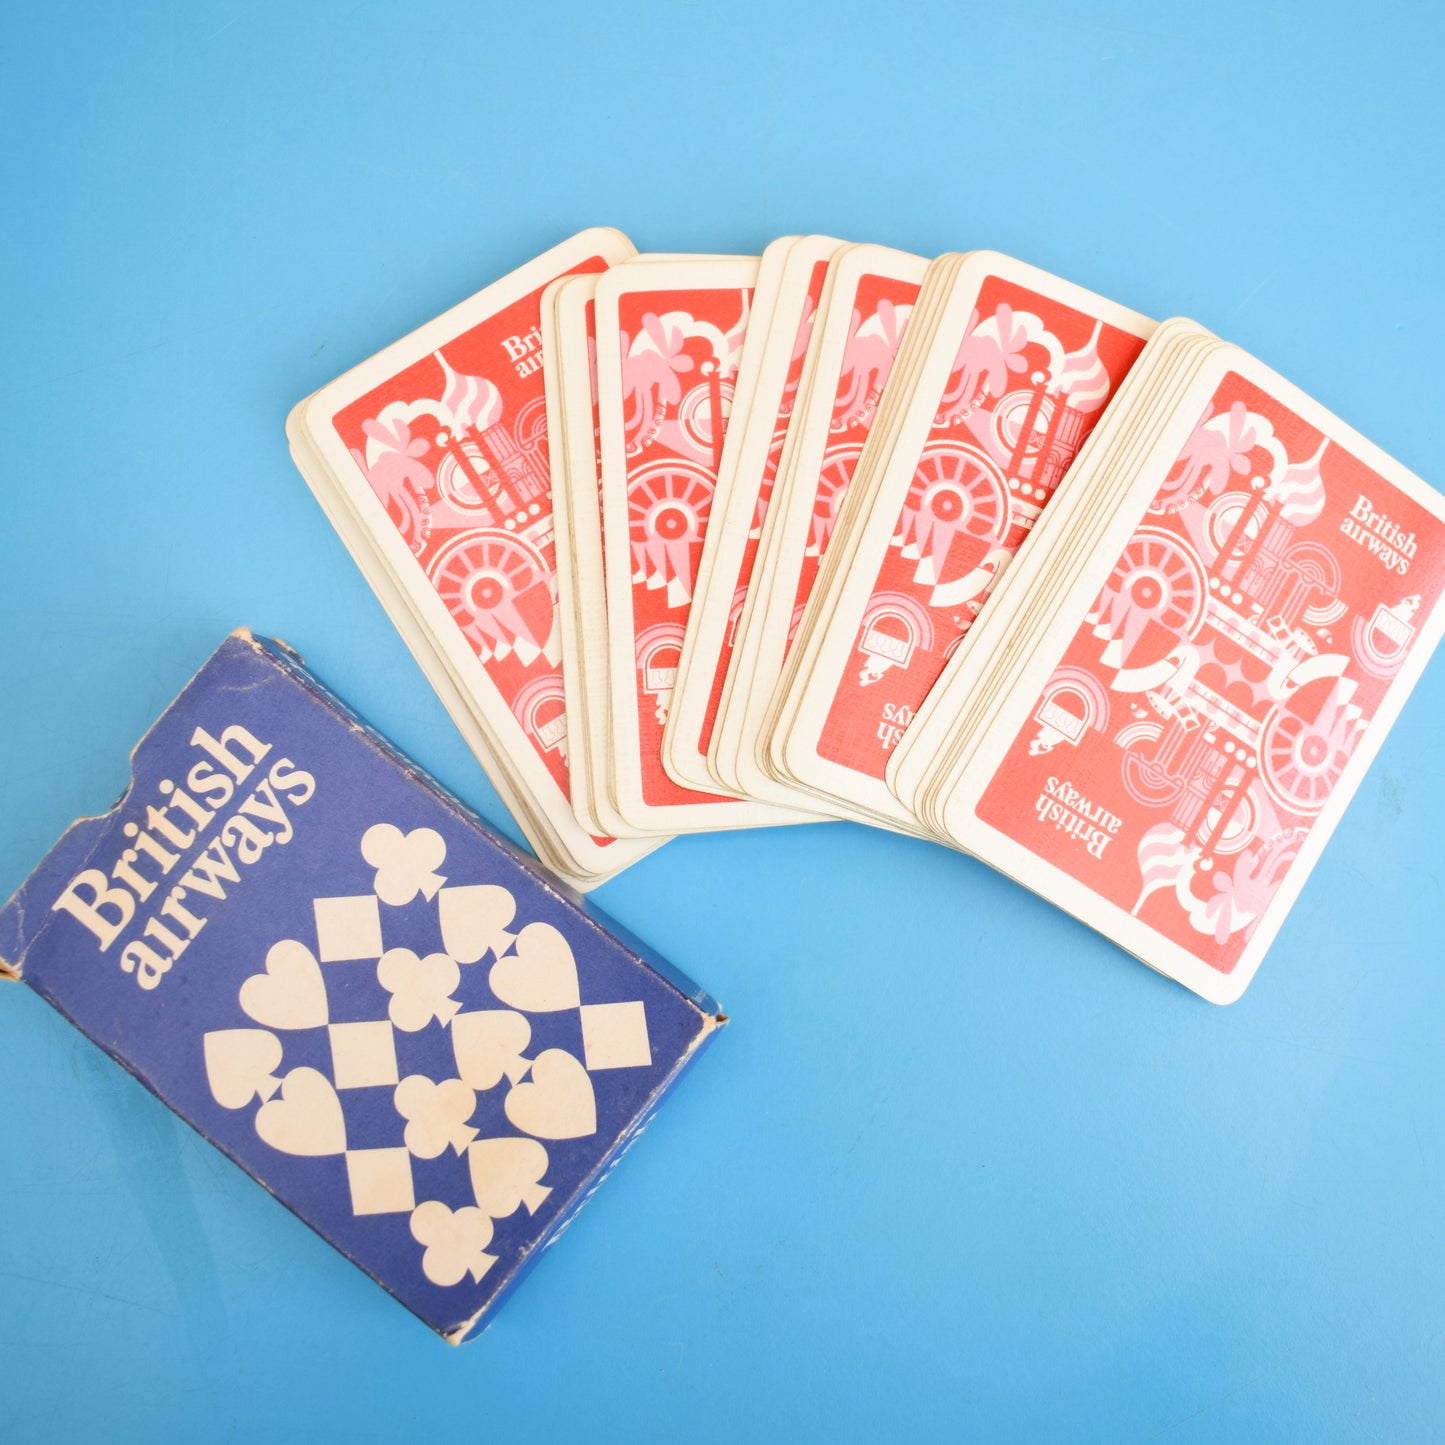 Vintage 1960s BA Playing Card Sets